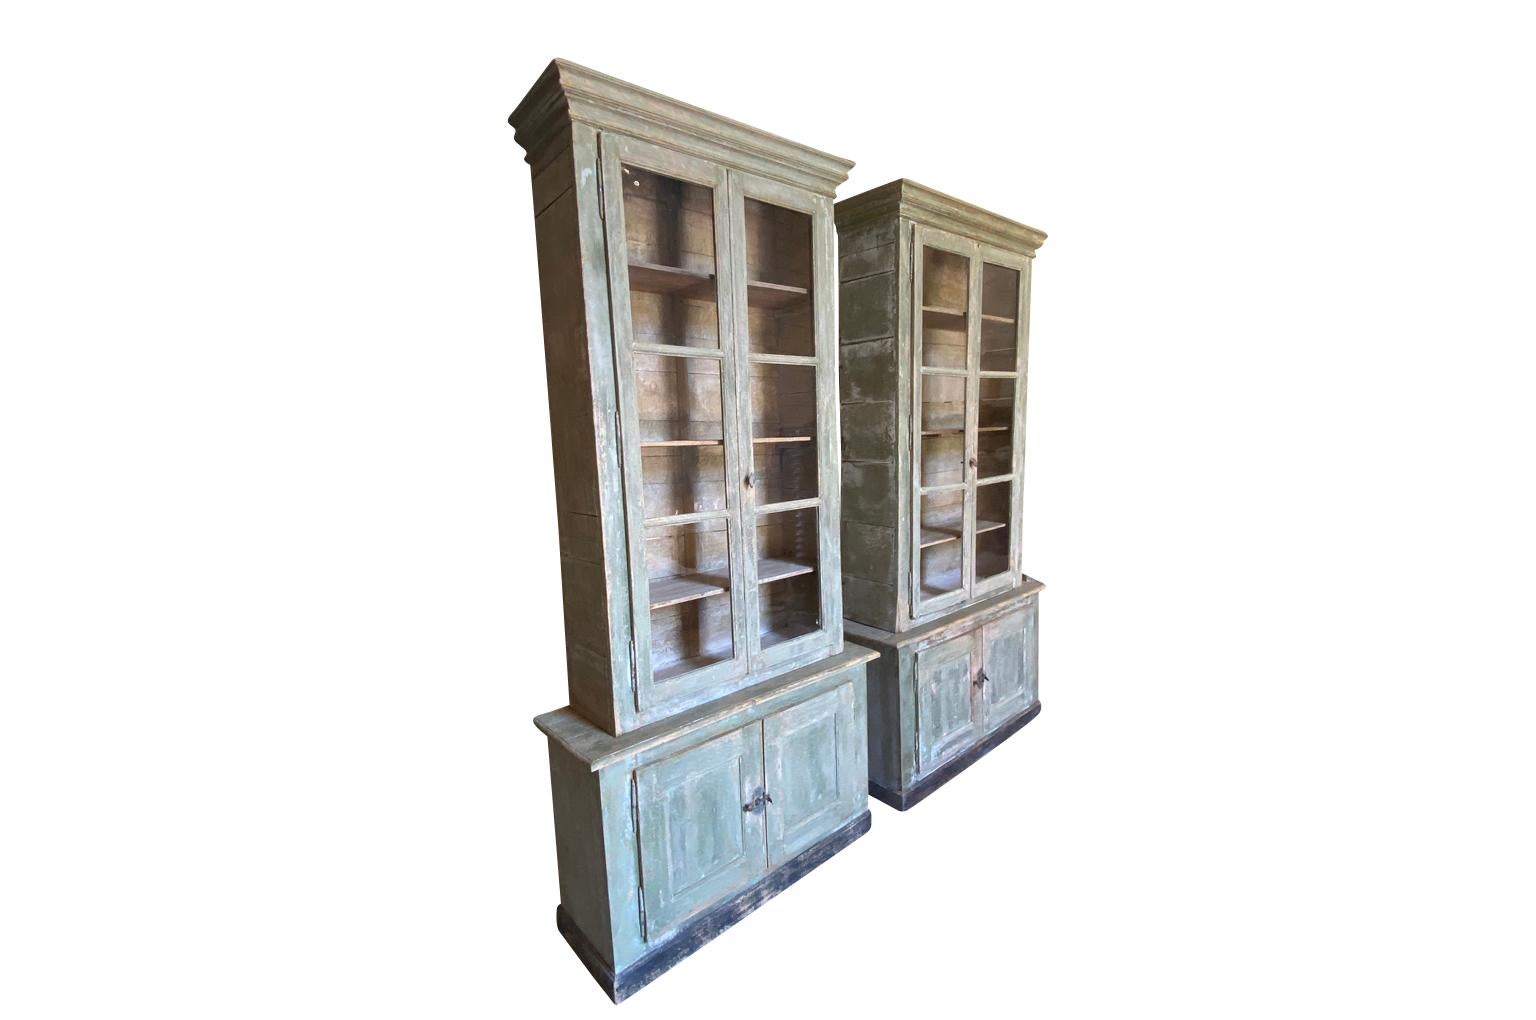 A wonderful pair of Deux Corps Bibliotheques from the Provence region of France.  Soundly constructed from painted pine with each having 4 doors and interior shelving.  Wonderful painted finish.  One bookcase measures 106 3/4